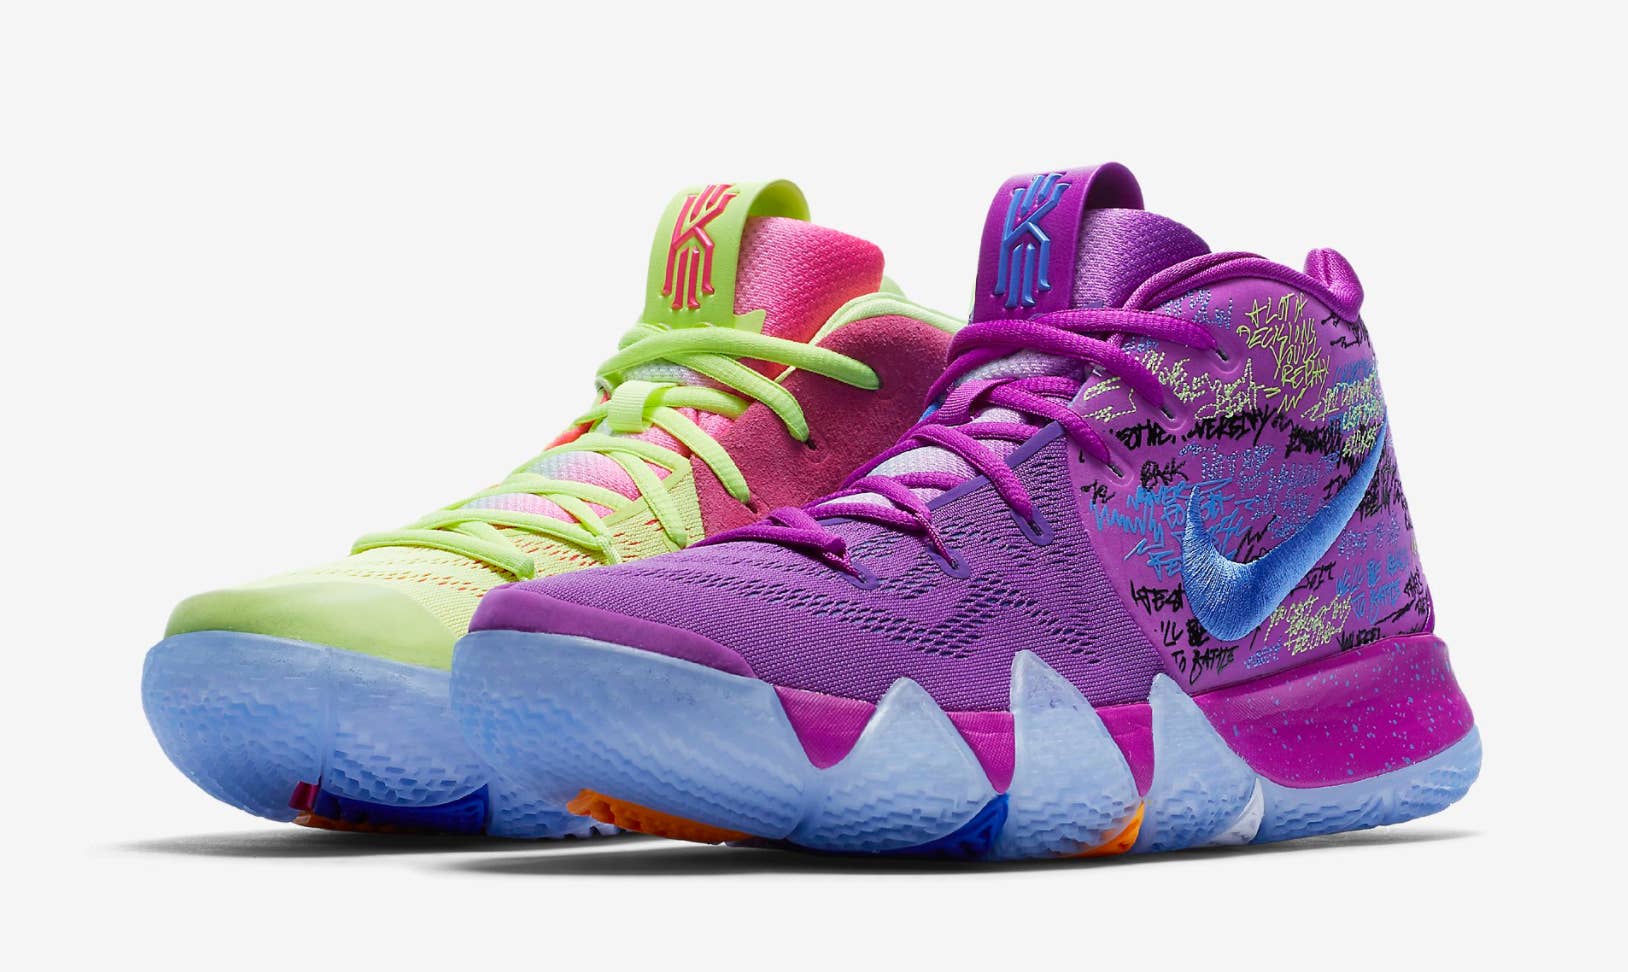 The 'Confetti' Nike Kyrie 4 Releases This Weekend | Complex